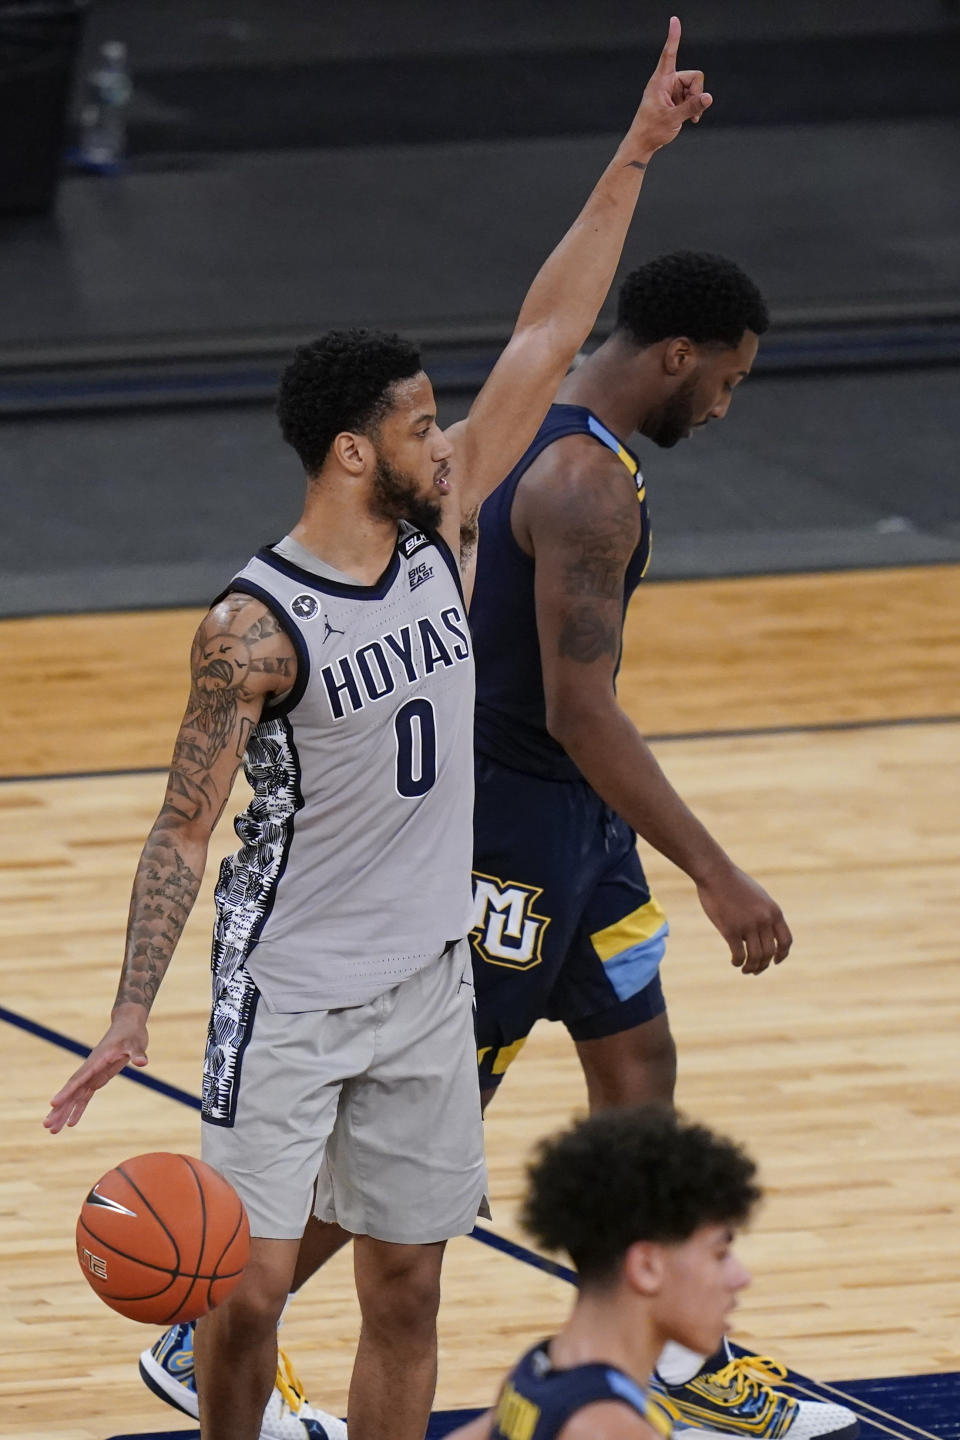 Georgetown's Jahvon Blair, left, gestures as Marquette's Symir Torrence, right, leaves the court after an NCAA college basketball game in the Big East conference tournament Wednesday, March 10, 2021, in New York. Georgetown won 68-49. (AP Photo/Frank Franklin II)